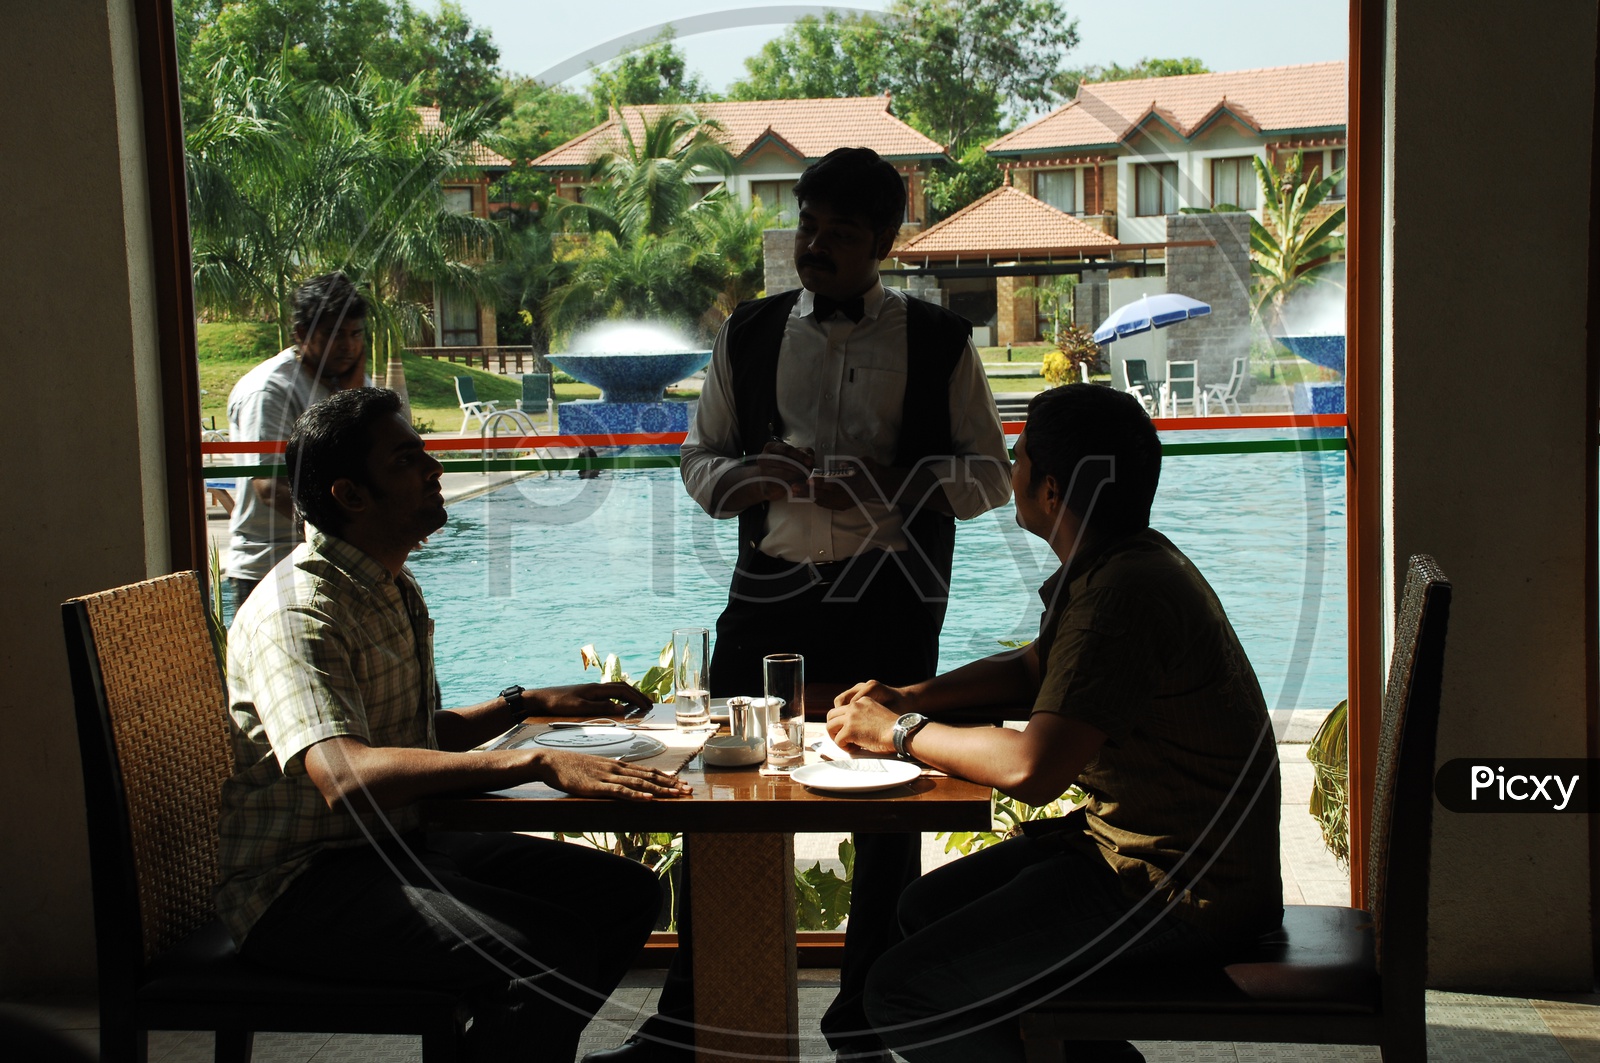 Friends in a Restaurant giving order to waiter